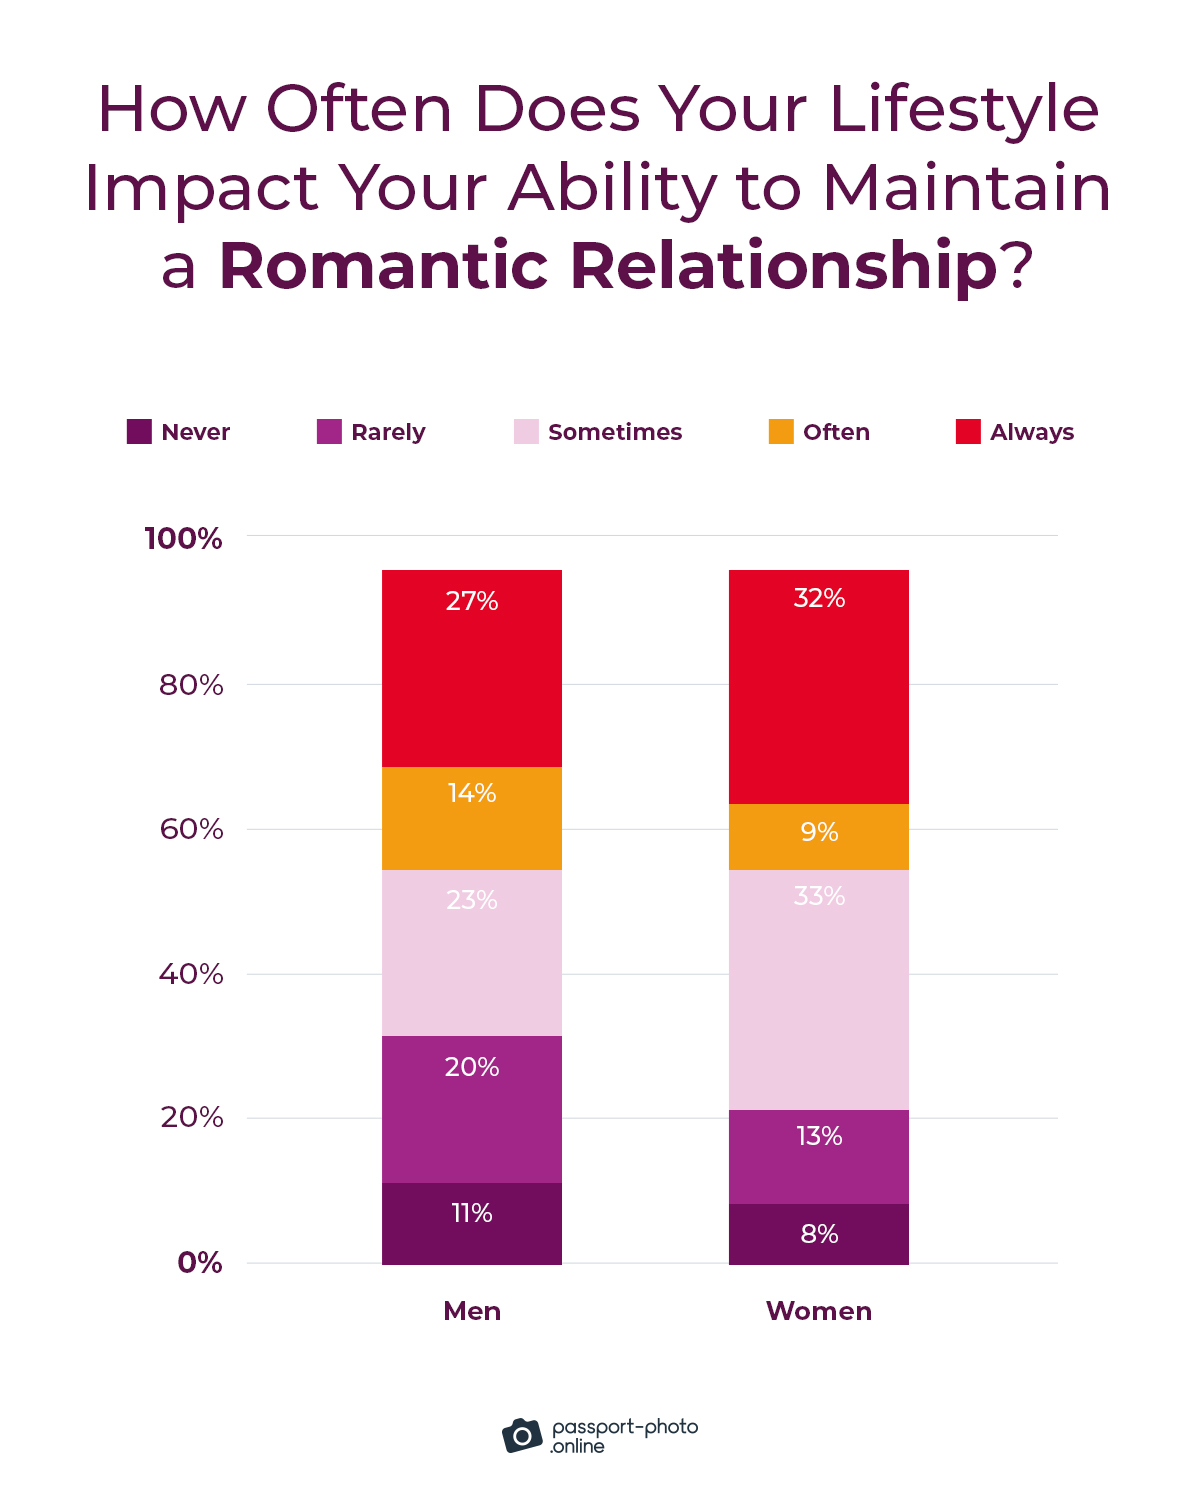 41% of digital nomads say their lifestyle affects their romantic relationships frequently or always